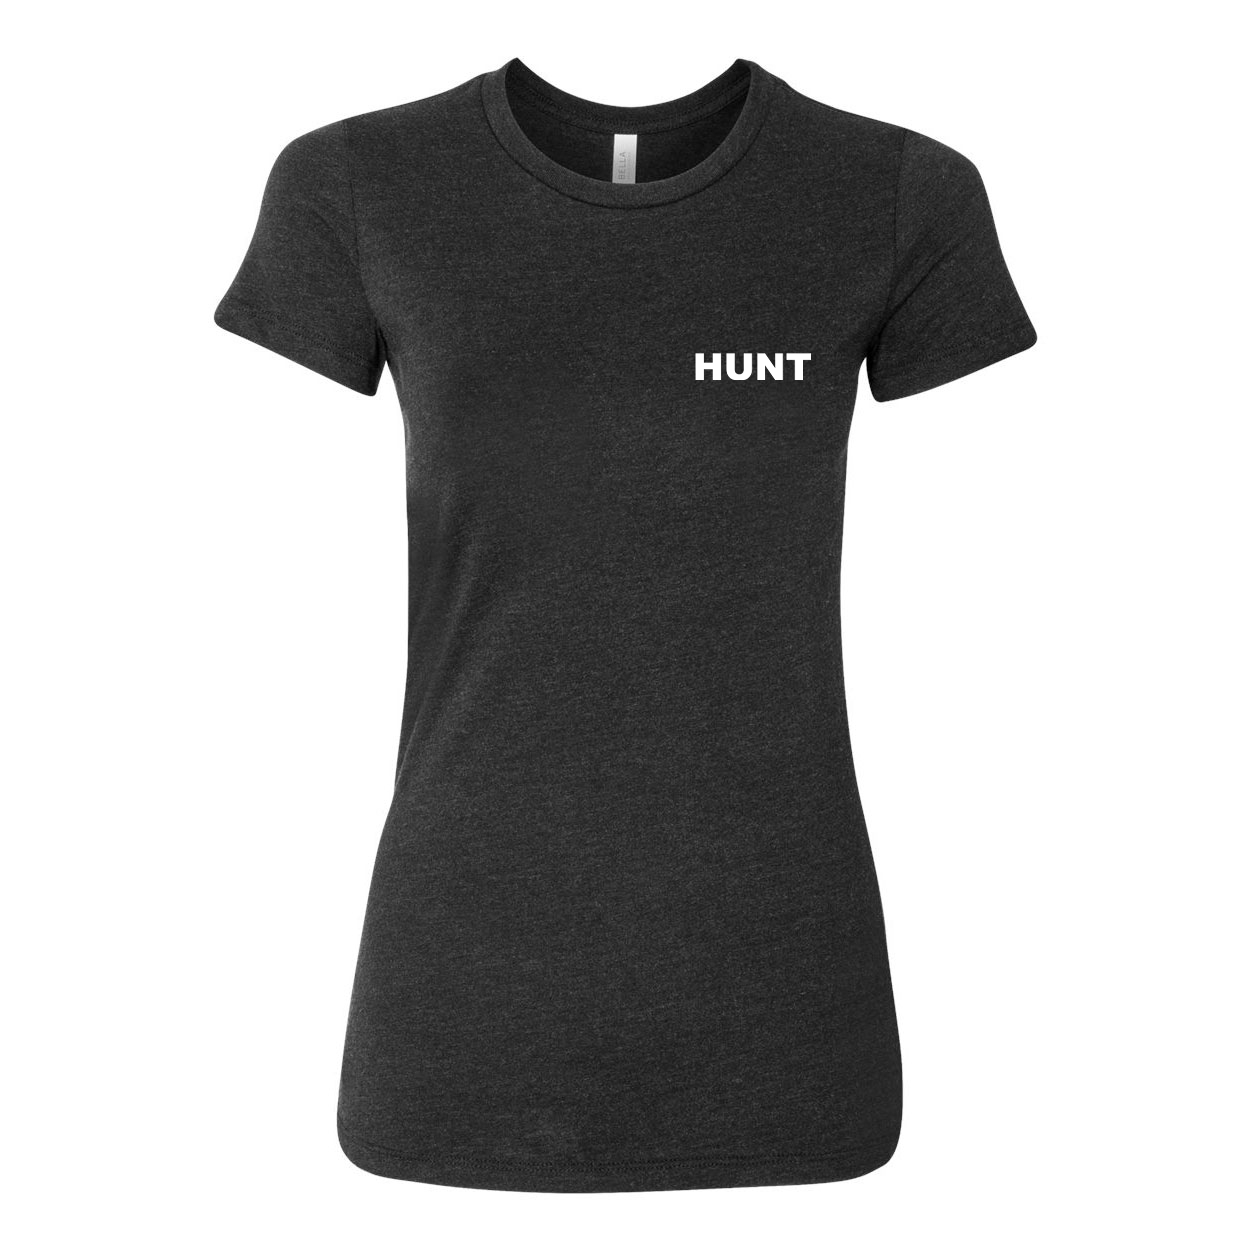 Hunt Brand Logo Night Out Womens Fitted T-Shirt Dark Heather Gray (White Logo)